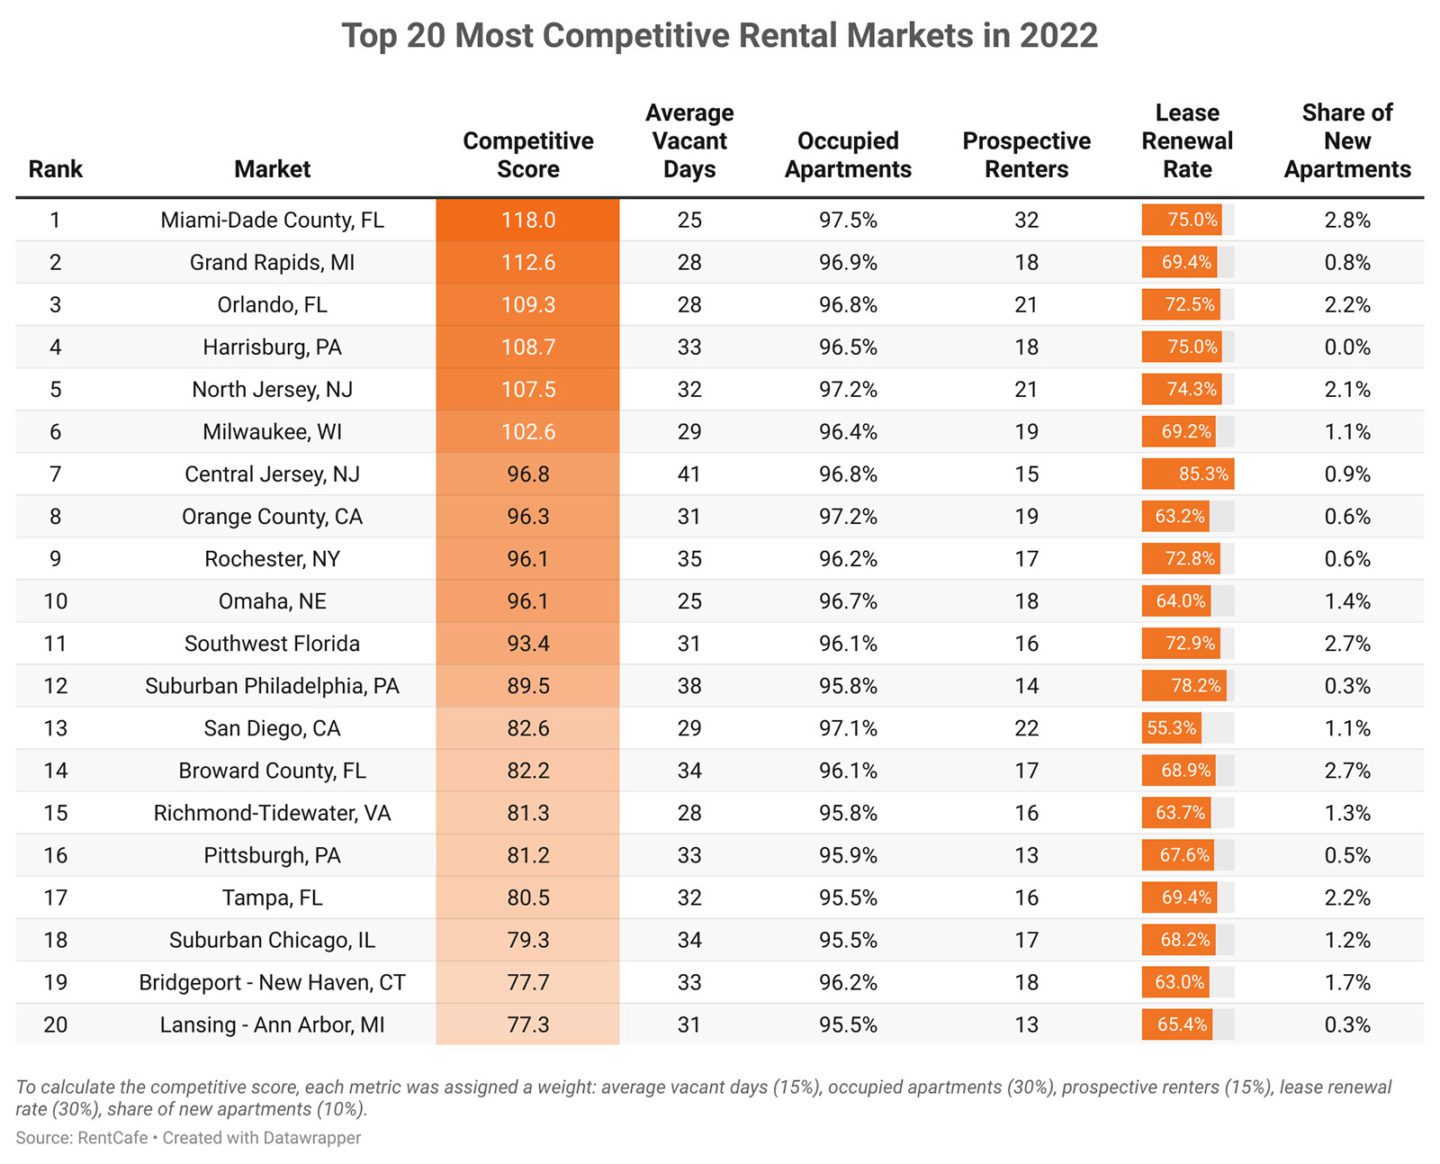 Top 20 Most Competitive Rental Markets In 2022